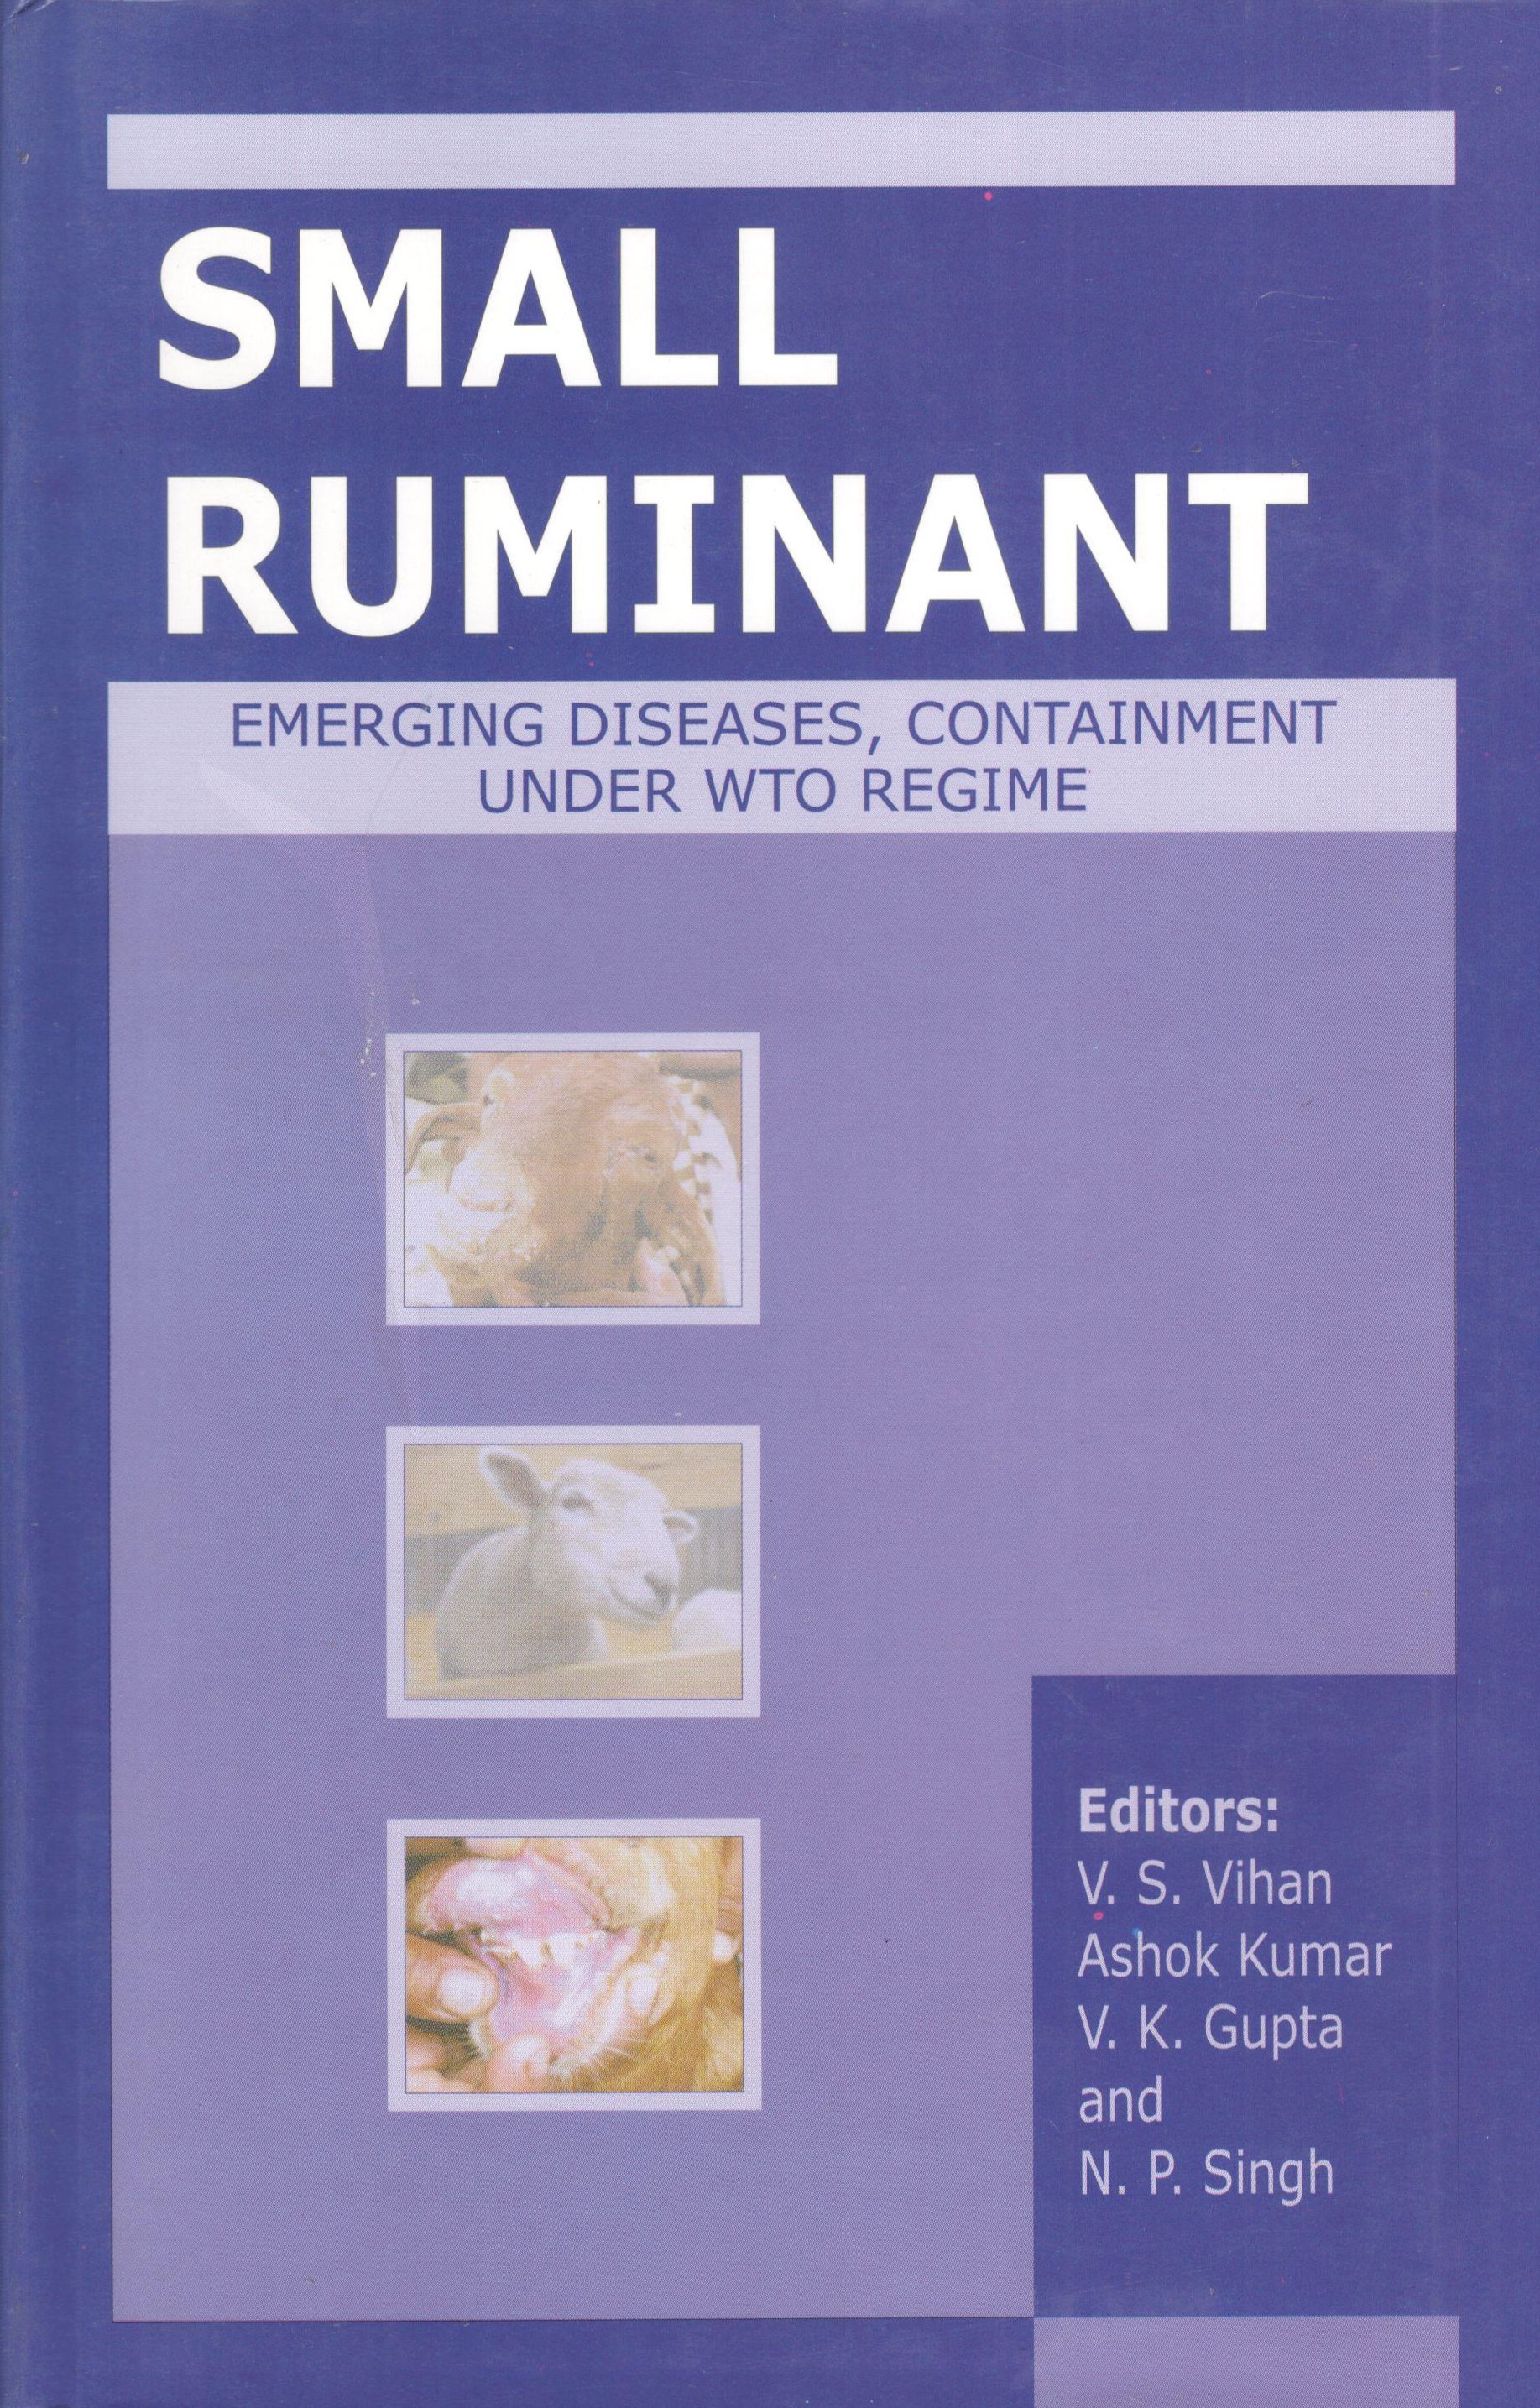 Small Ruminant Emerging Diseases Containment Under WTO Regime